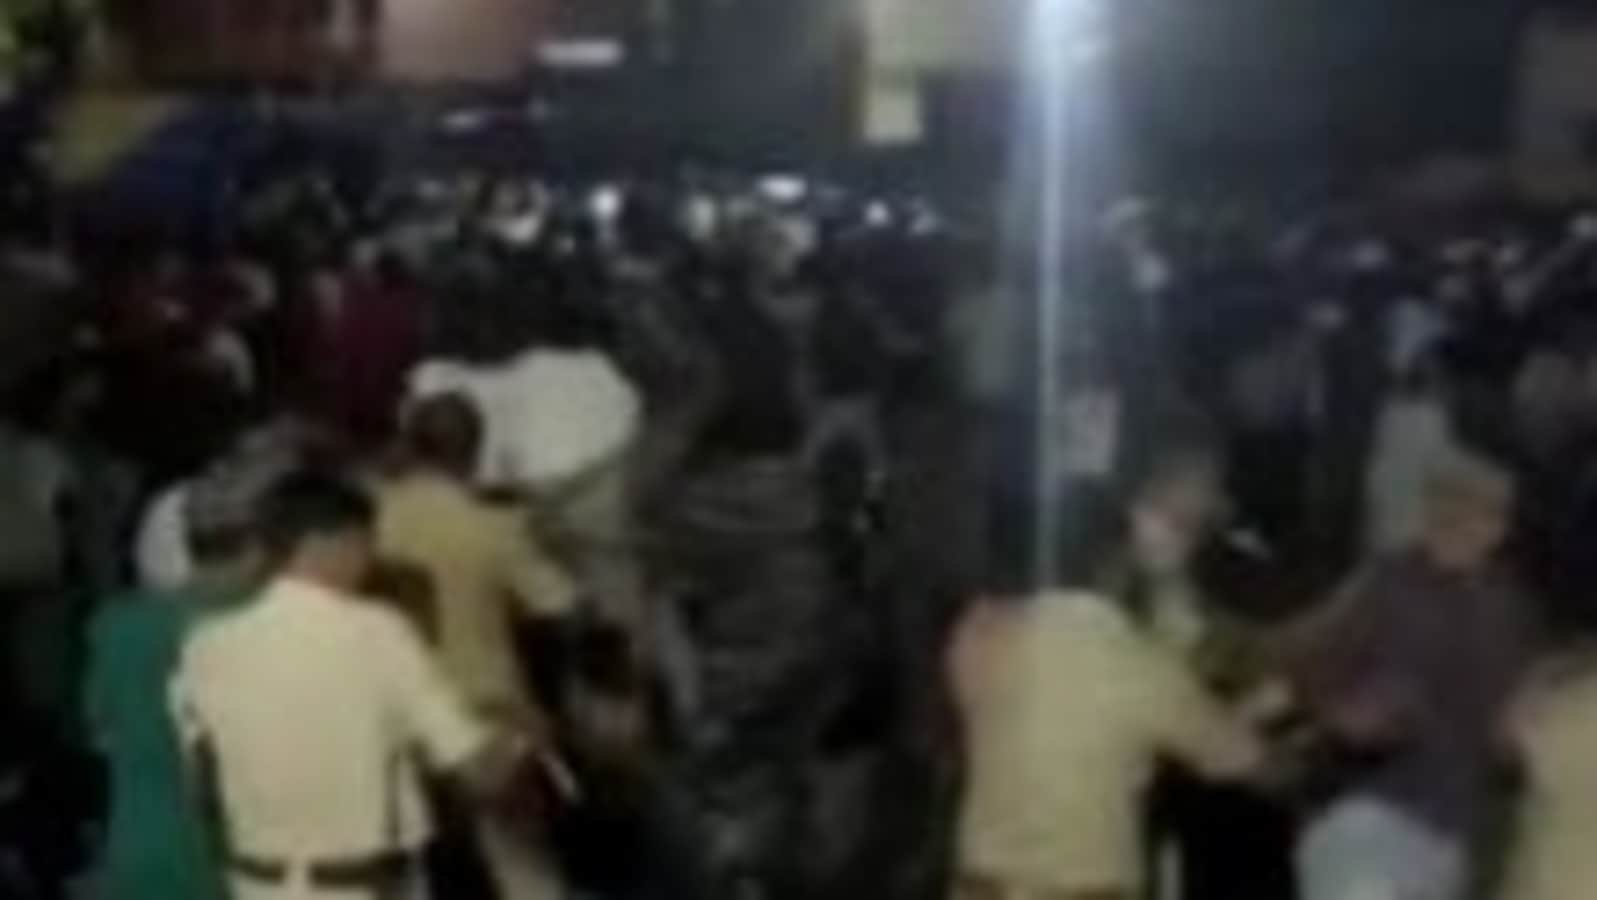 Video: Protest in Telangana over social media post, cops resort to use of force